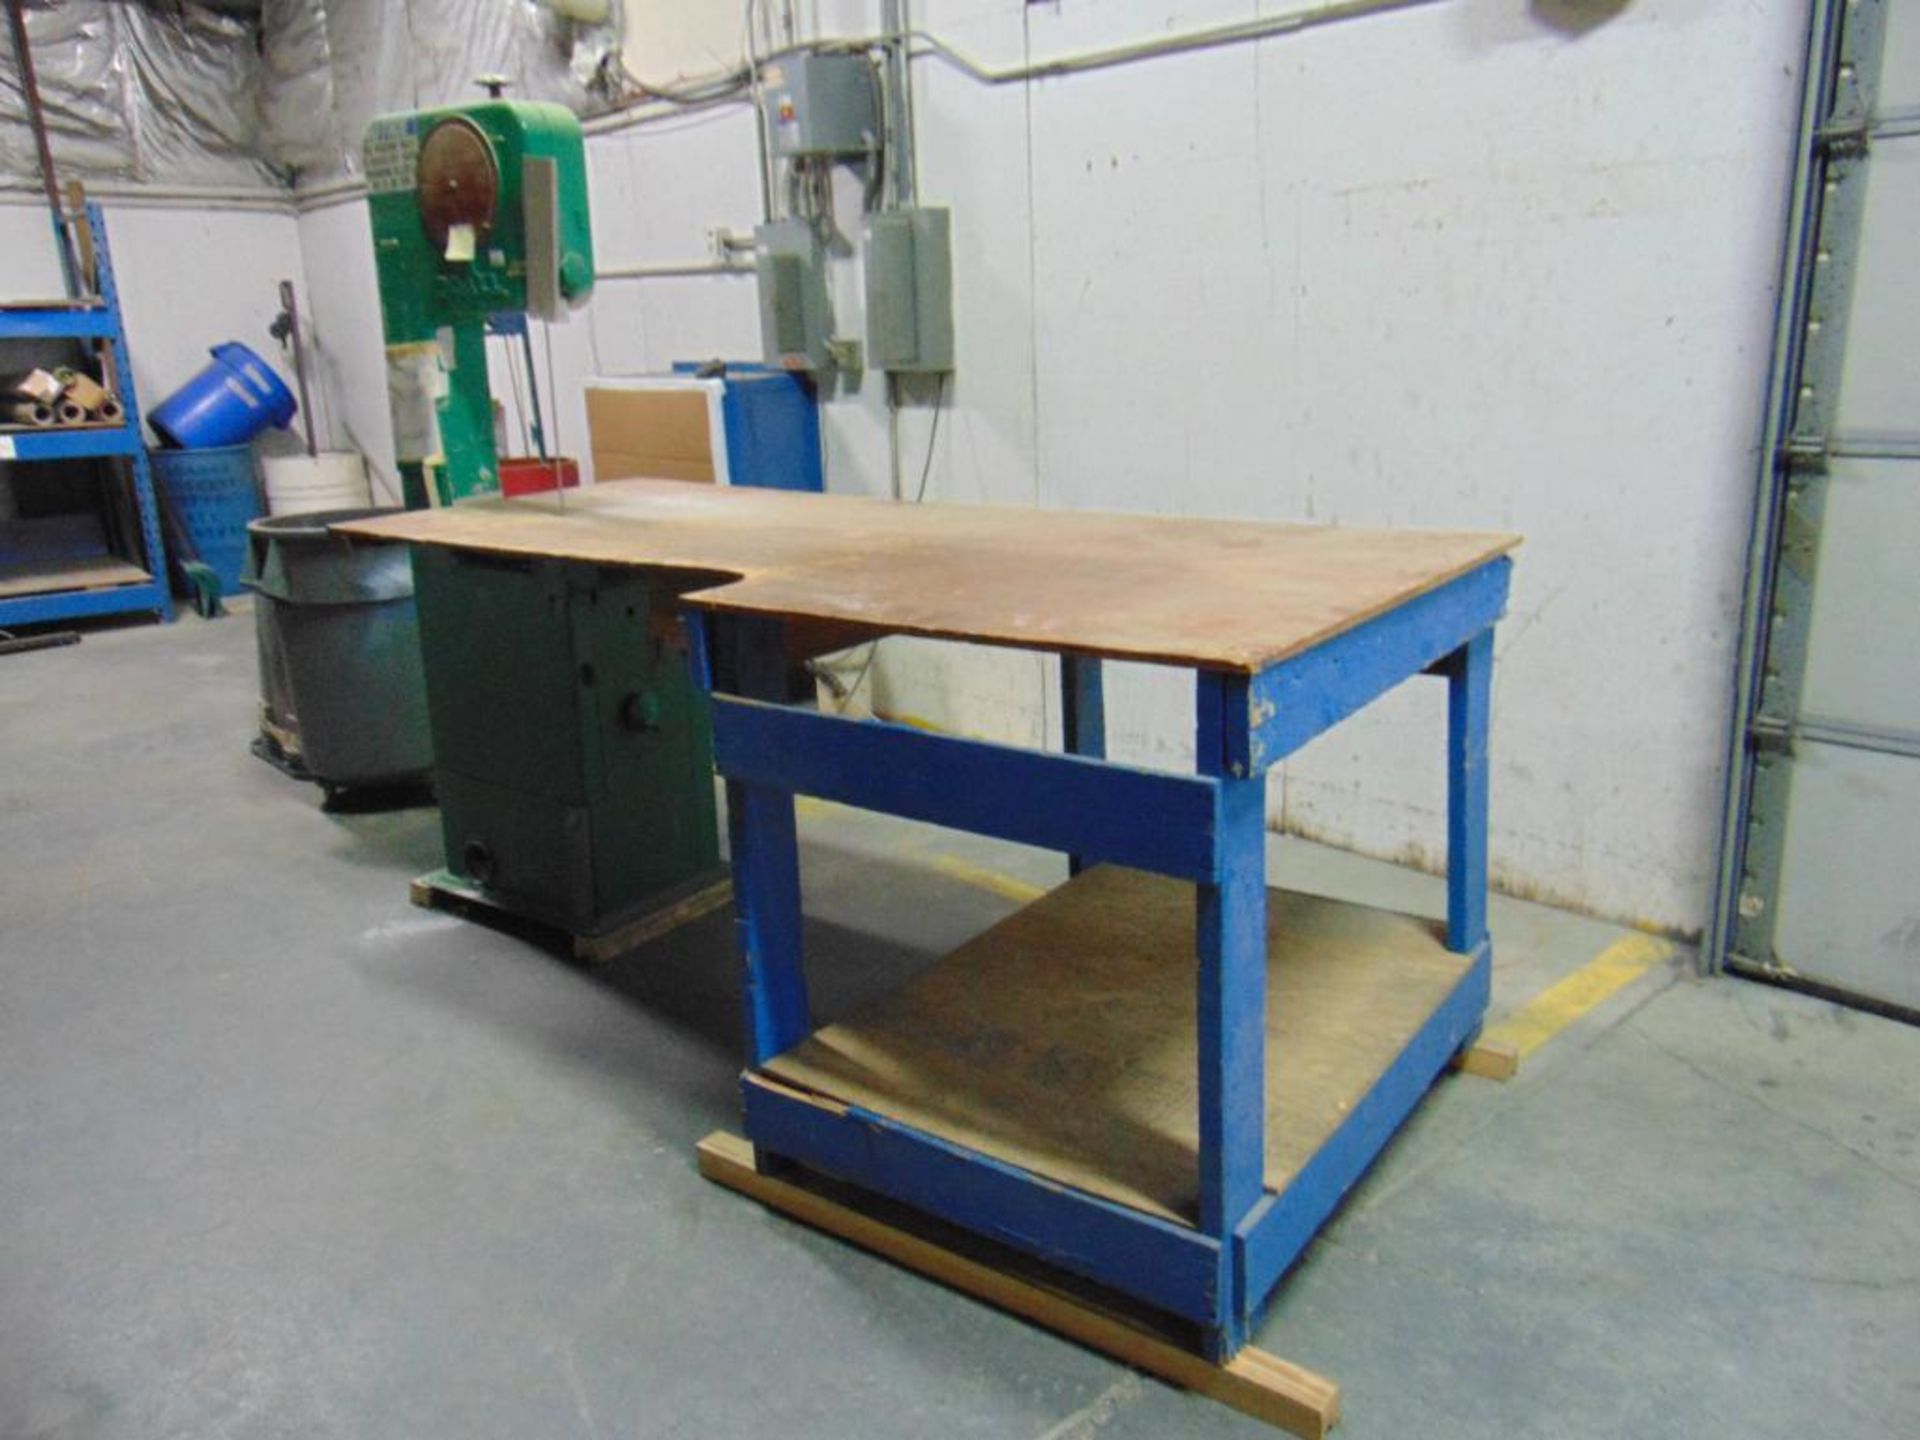 Do-All S-F-P 15" Band Saw